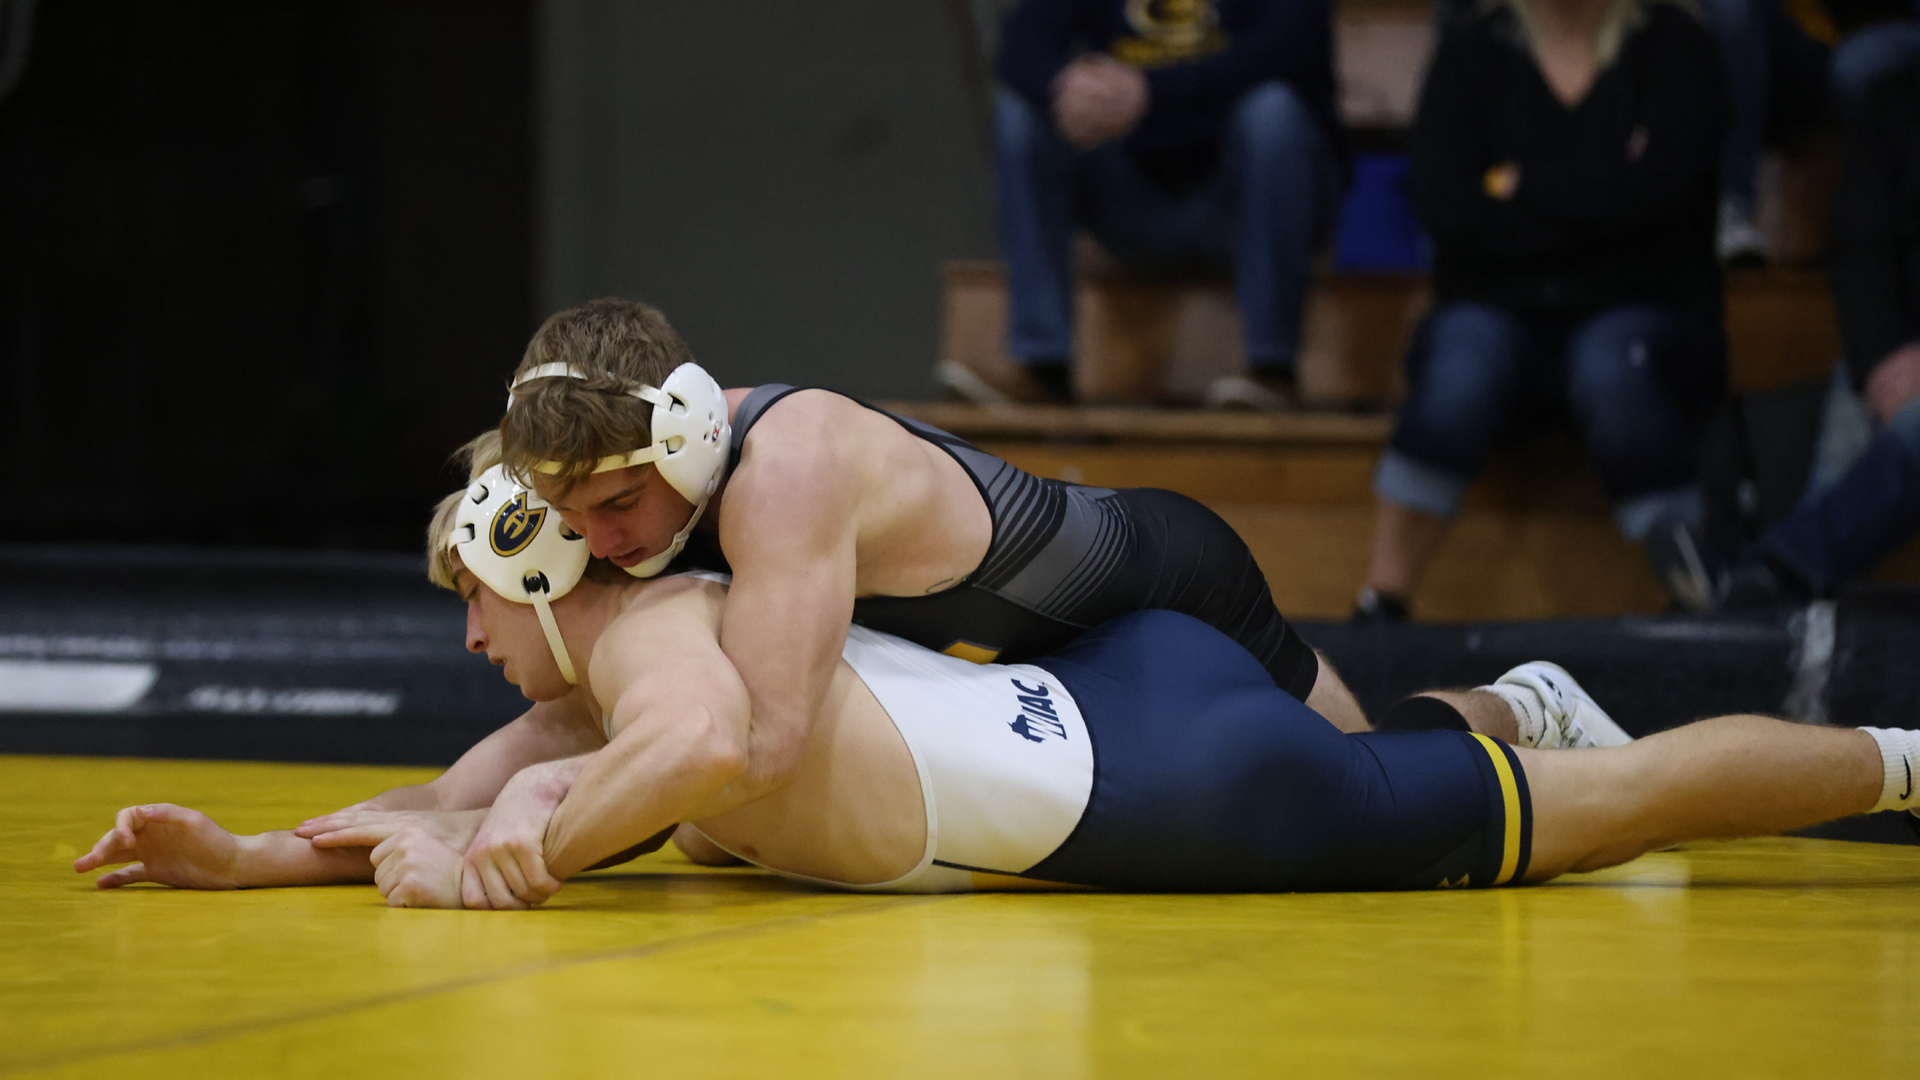 Andrew Schad pinned Jaydon Sheppard in the Titans' 49-6 loss to UW-Eau Claire on Wednesday